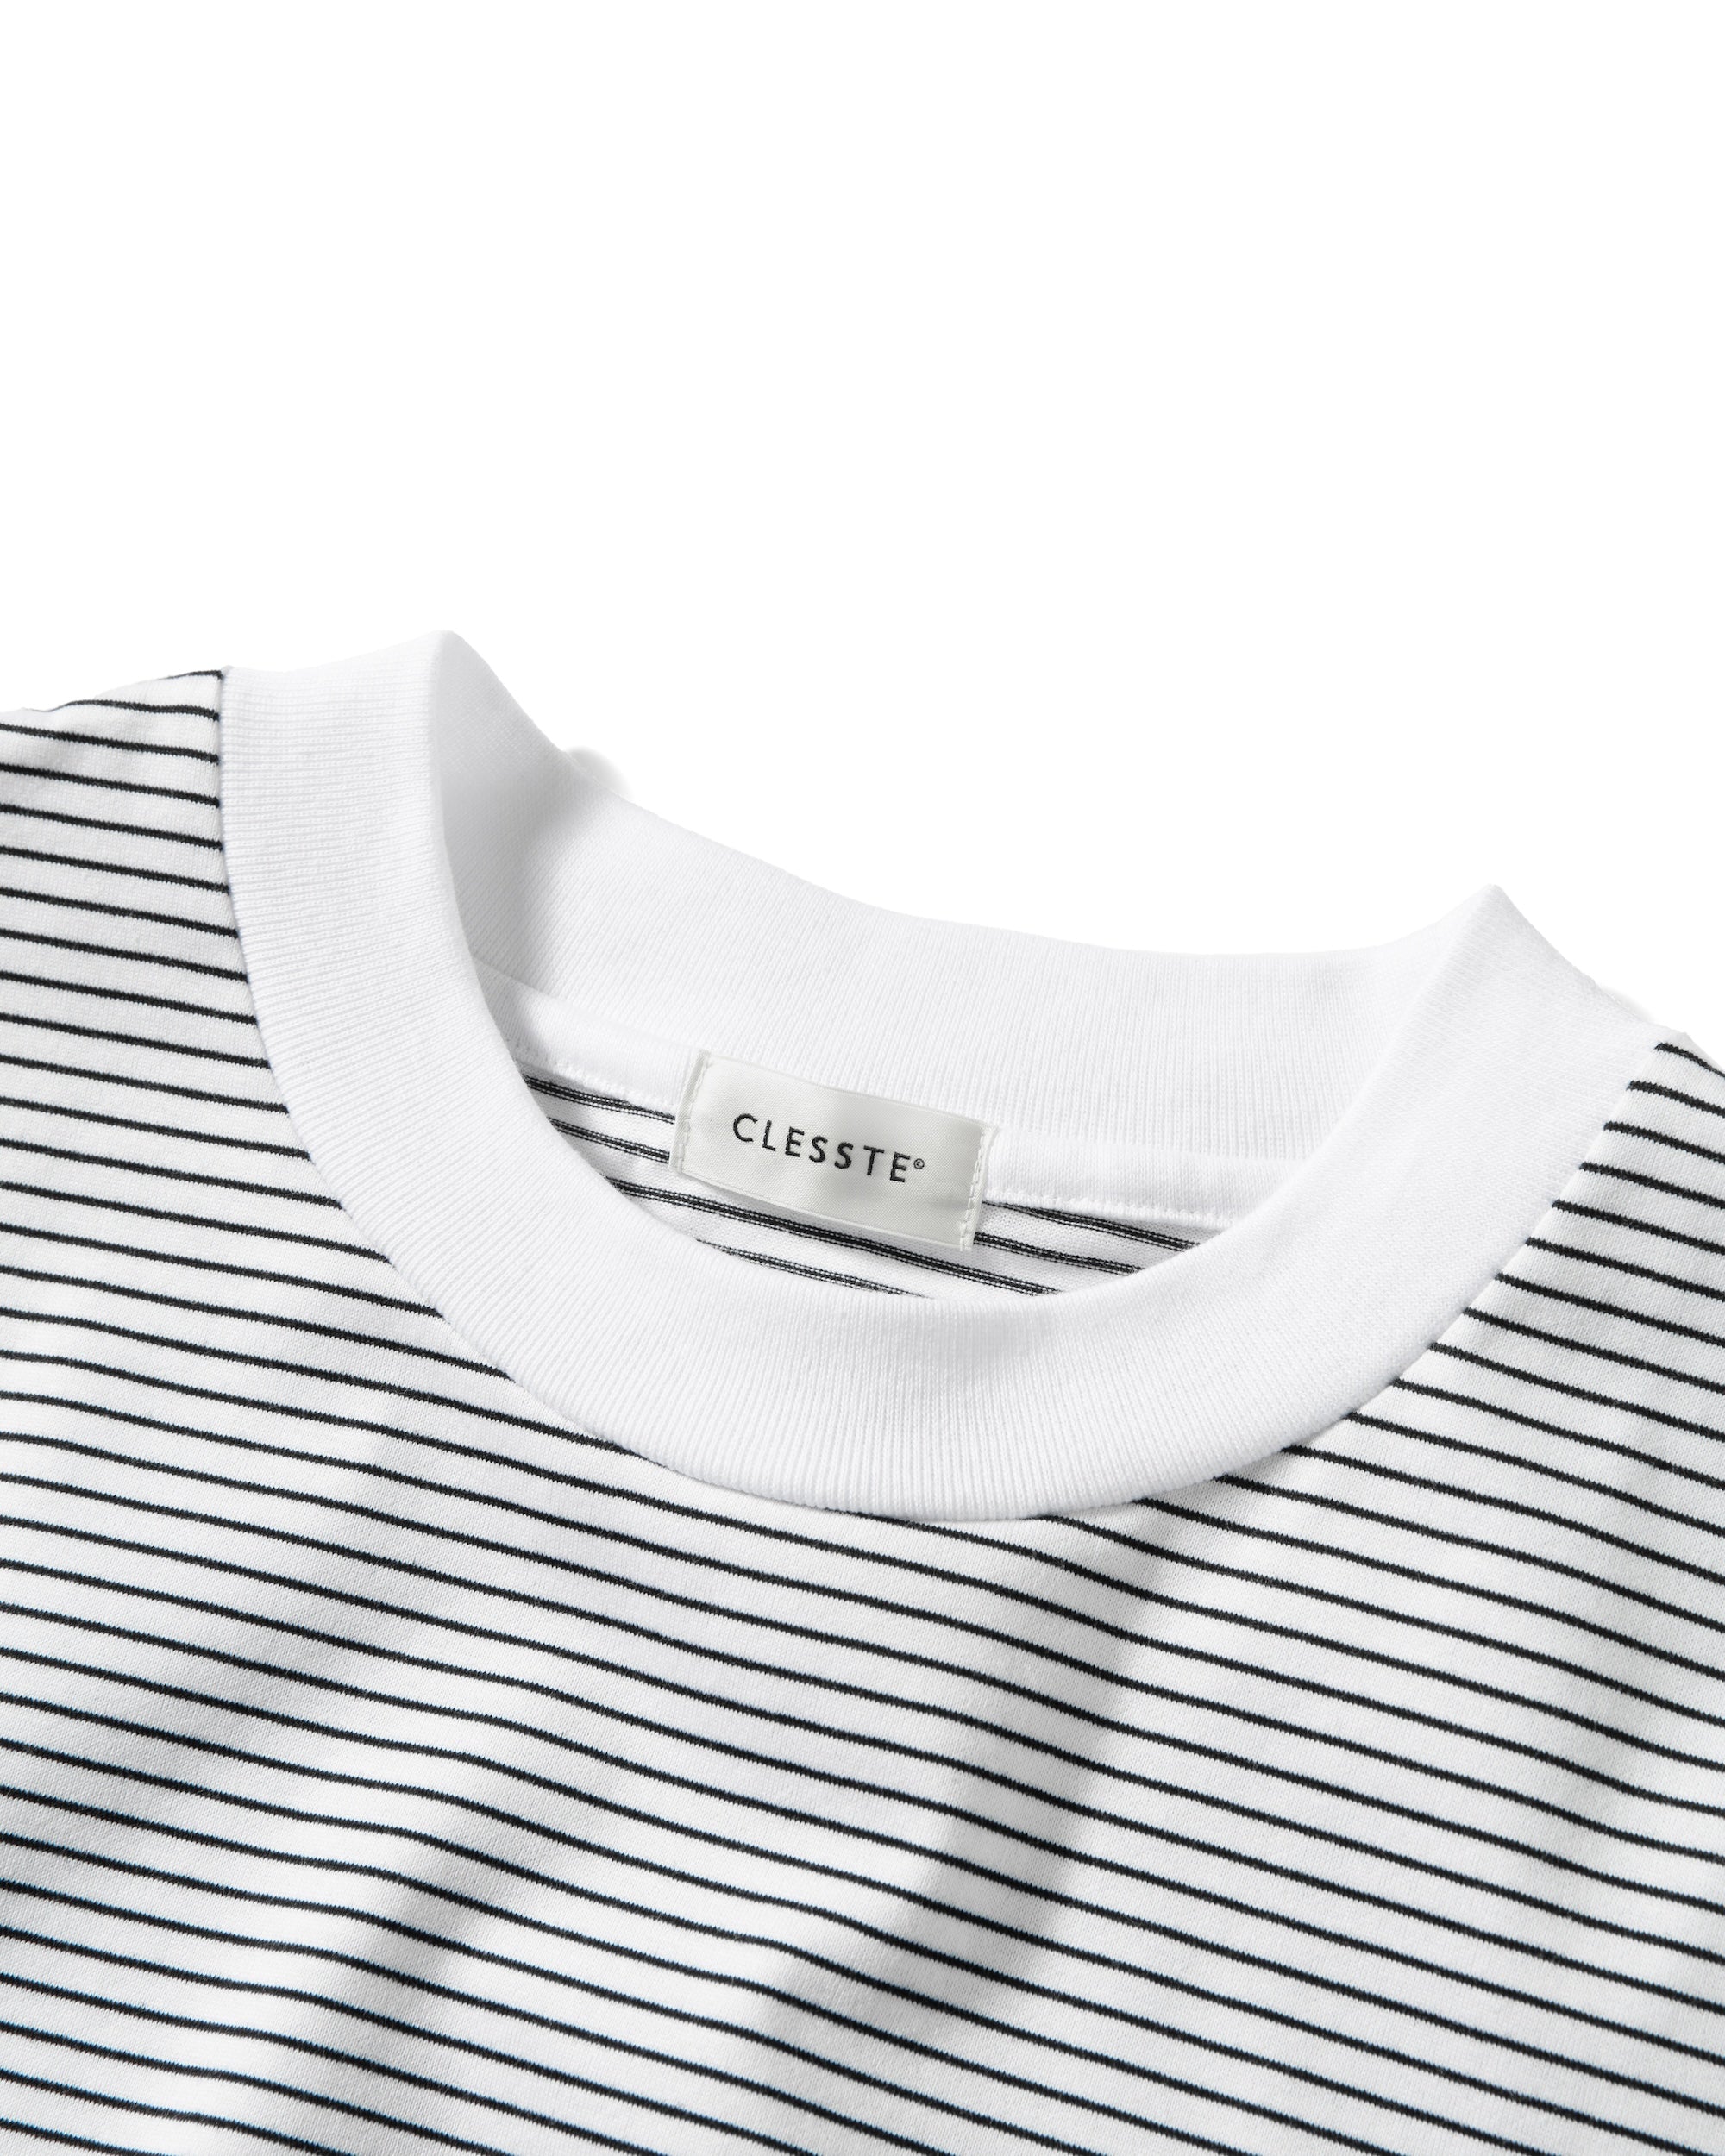 STRIPED MASSIVE T-SHIRT WITH DRAWSTRINGS